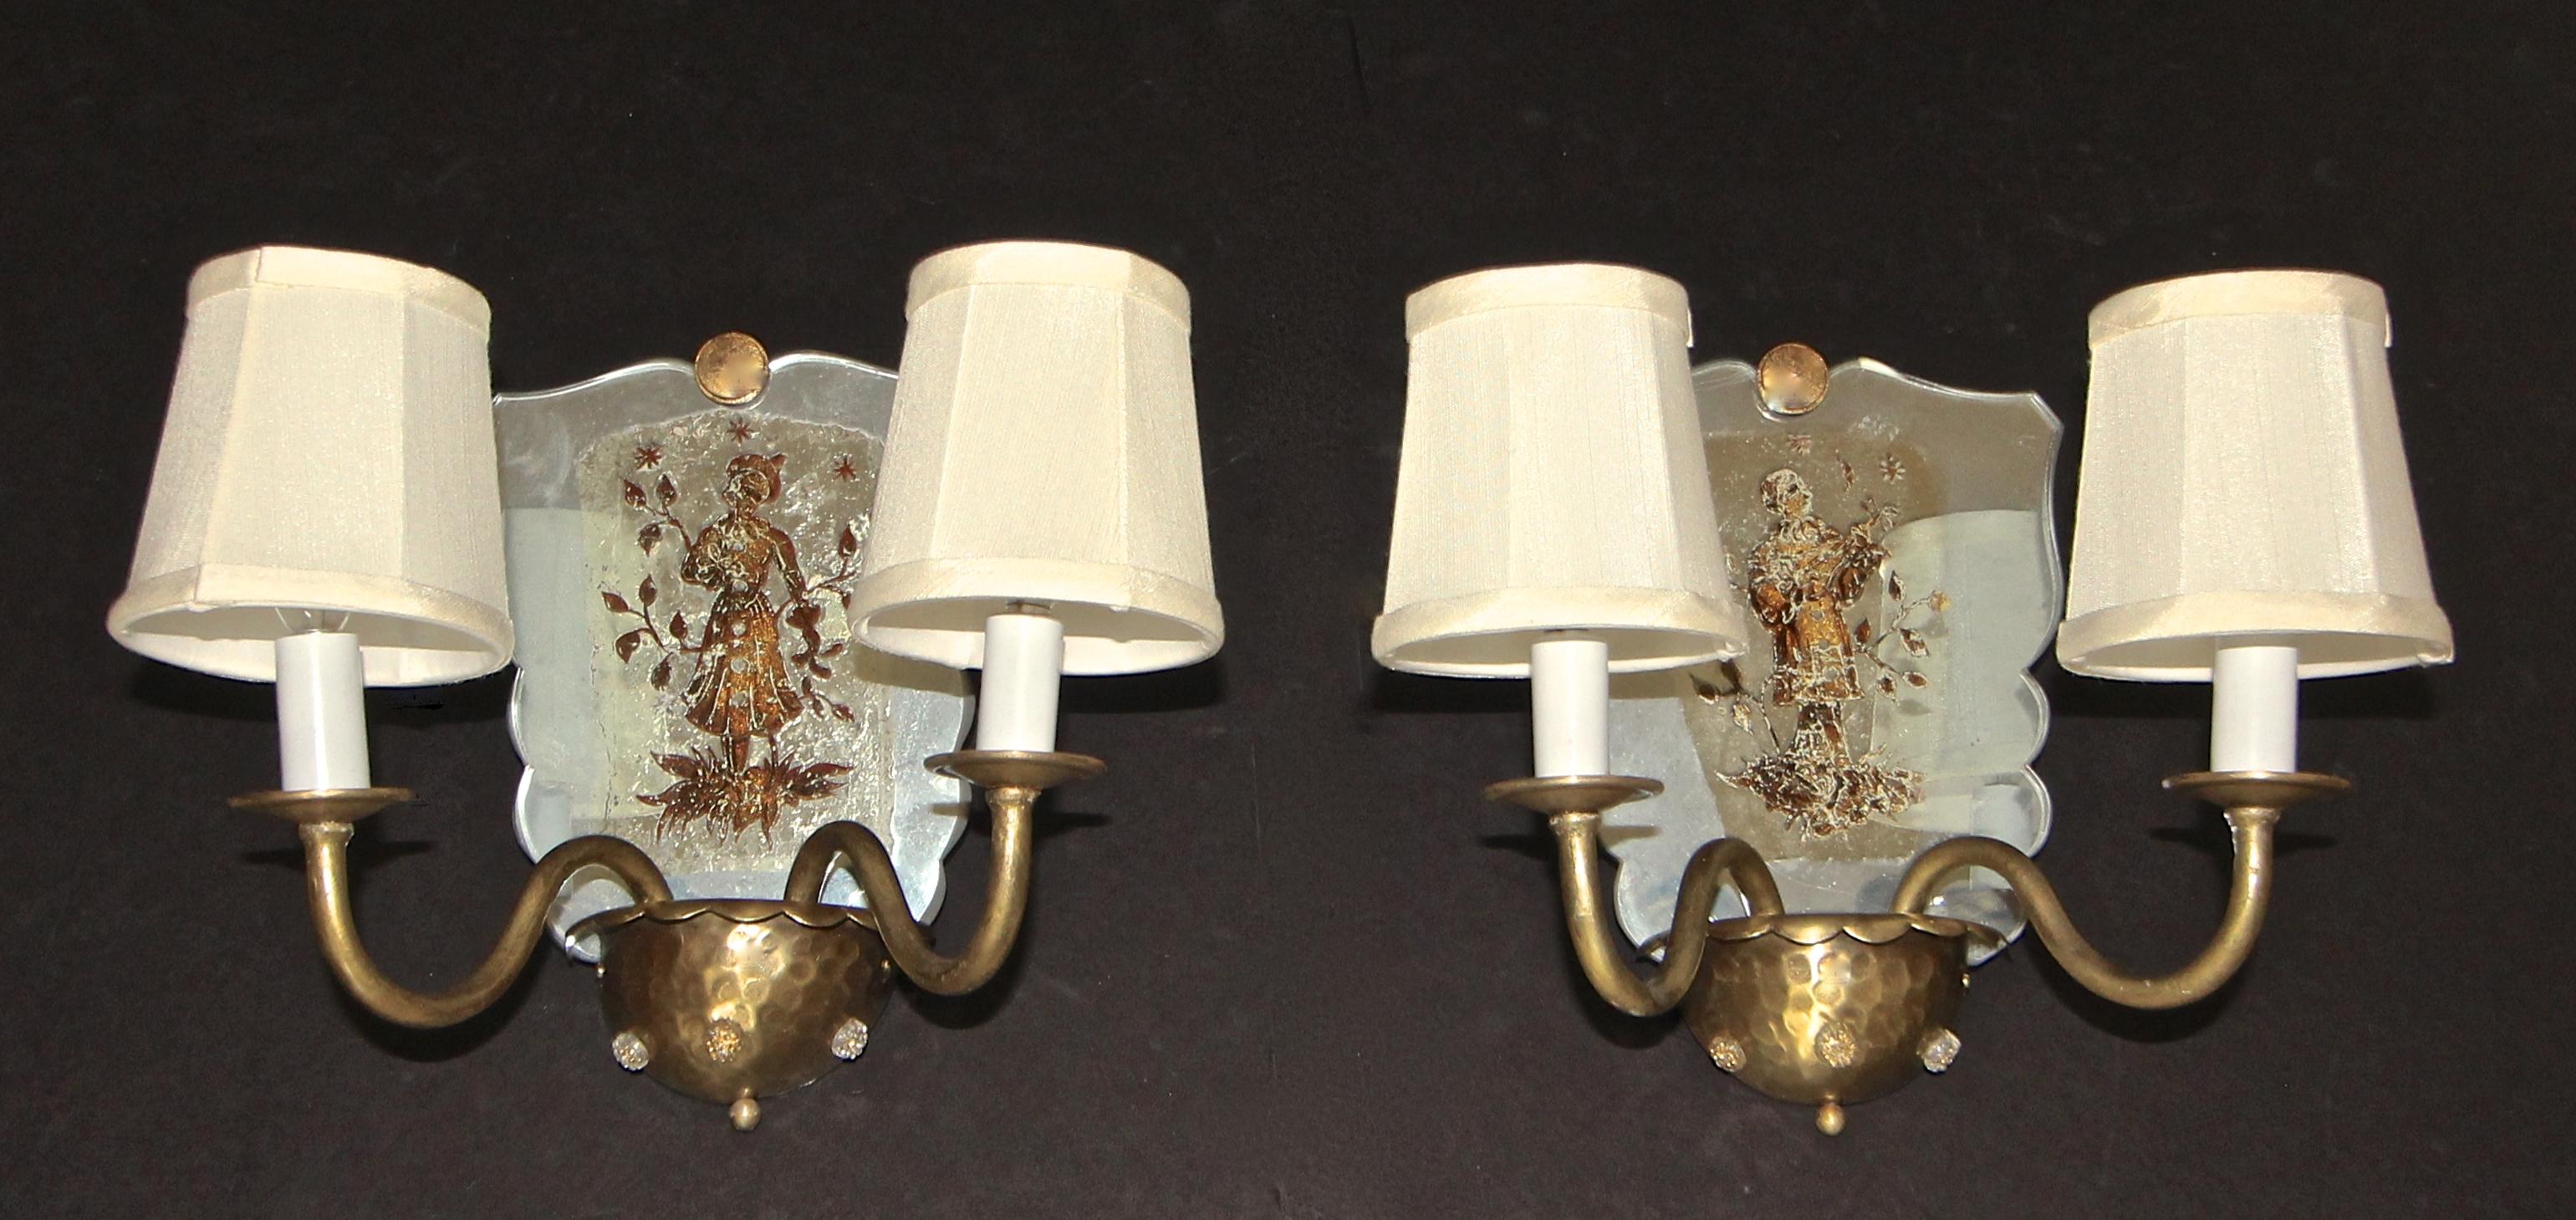 Pair of Venetian mirrored gold metal 2-arm wall sconces with applied classical figures decoration to mirrored backs. Each uses two candelabra size bulbs, newly wired. Shades included.